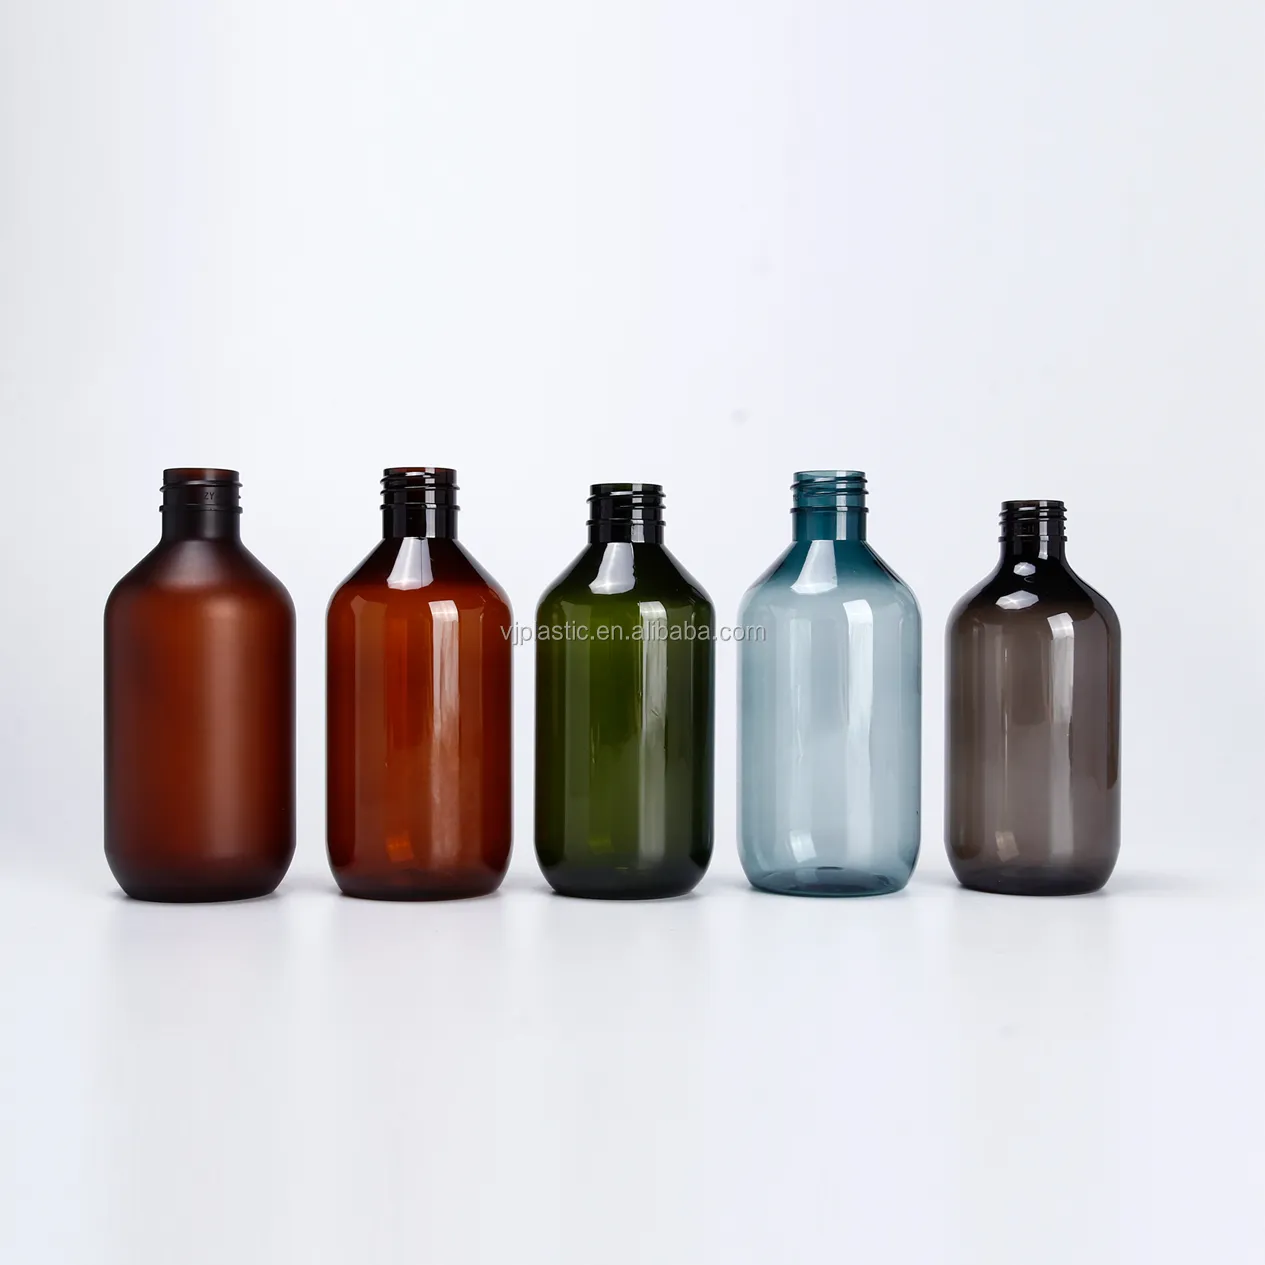 Amber And Green Shampoo Use and Engraving Surface Handling 250ml 500ml PET Plastic Liquid Soap Bottle BPA Free